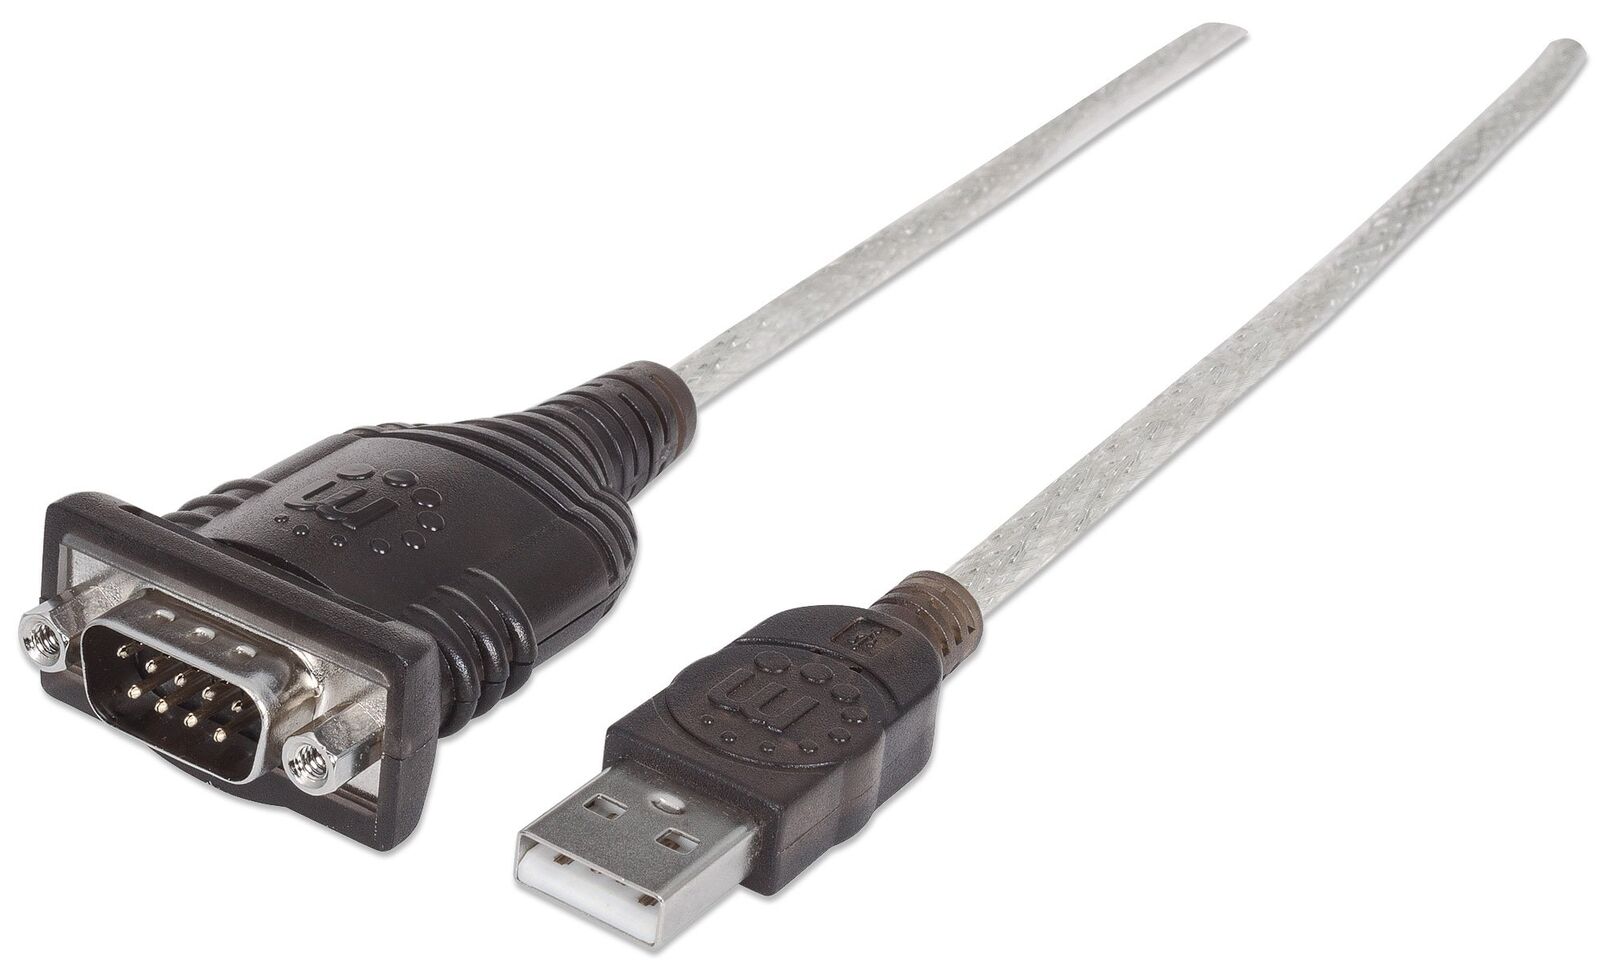 Manhattan USB-A to Serial Converter cable, 45cm, Male to Male, Serial/RS232/COM/